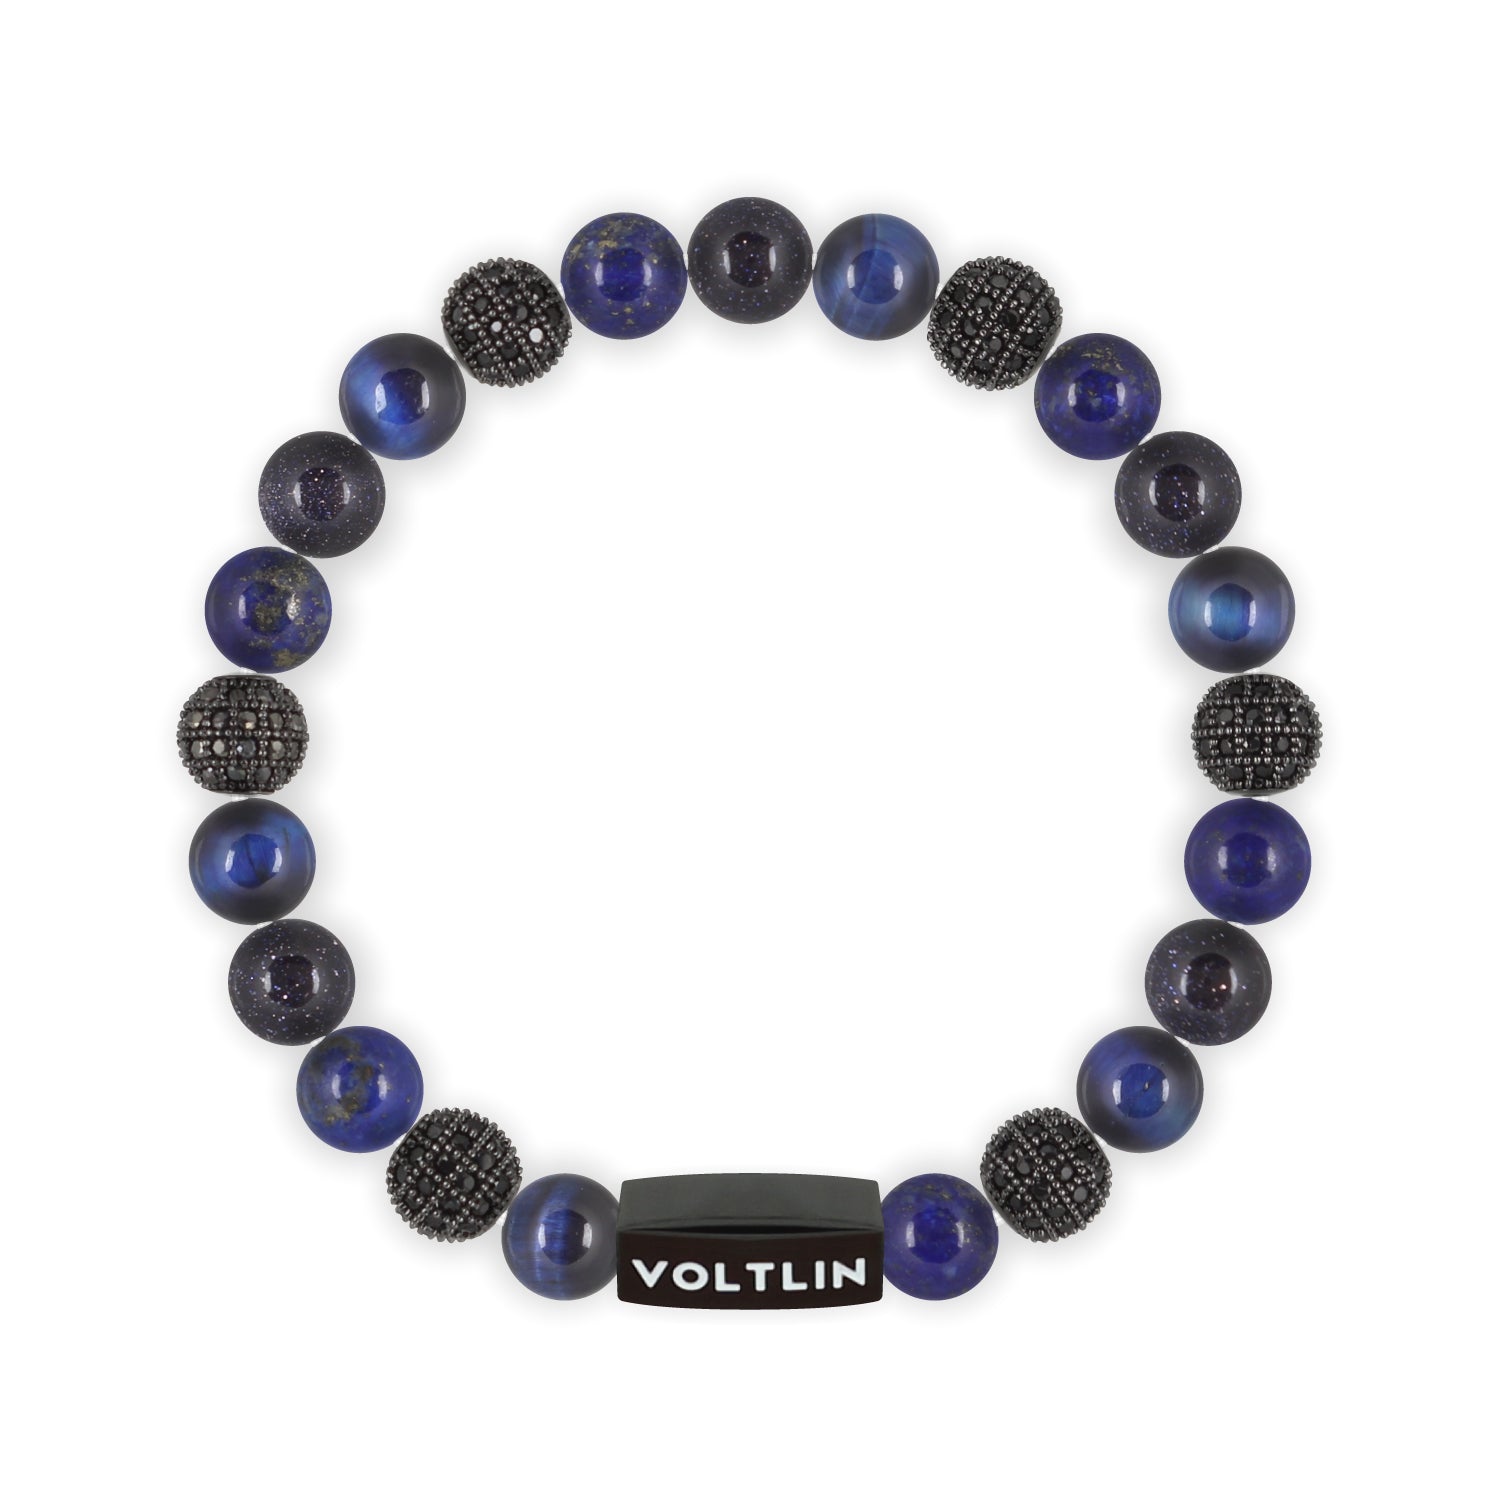 Front view of an 8mm Blue Sirius beaded stretch bracelet featuring Blue Tiger’s Eye, Black Pave, Lapis Lazuli, & Blue Goldstone crystal and black stainless steel logo bead made by Voltlin